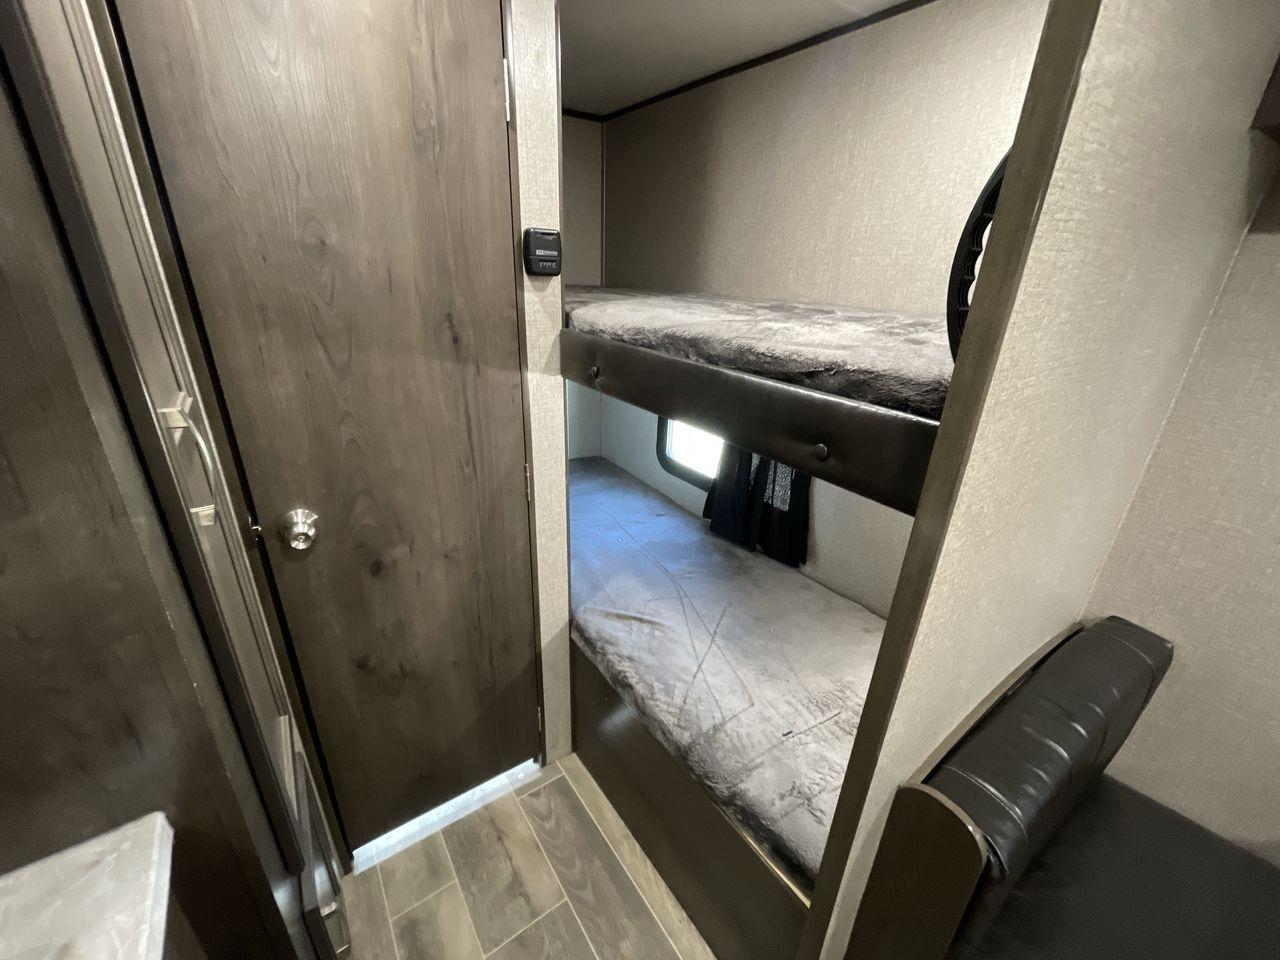 2021 JAYCO JAY FLIGHT SLX 174BH (1UJBJ0AJ1M1) , Length: 21.67 ft | Dry Weight: 3,075 lbs | GVWR: 3,950 lbs | Slides: 0 transmission, located at 4319 N Main Street, Cleburne, TX, 76033, (817) 221-0660, 32.435829, -97.384178 - Take the 2021 Jayco Jay Flight SLX 174BH travel trailer out on your camping adventures. This lightweight and small RV is ideal for people looking for an affordable and cozy way to enjoy the great outdoors. The dimensions of this unit are 21.67 ft in length, 7.08 ft in width, and 9.17 ft in height. I - Photo #13